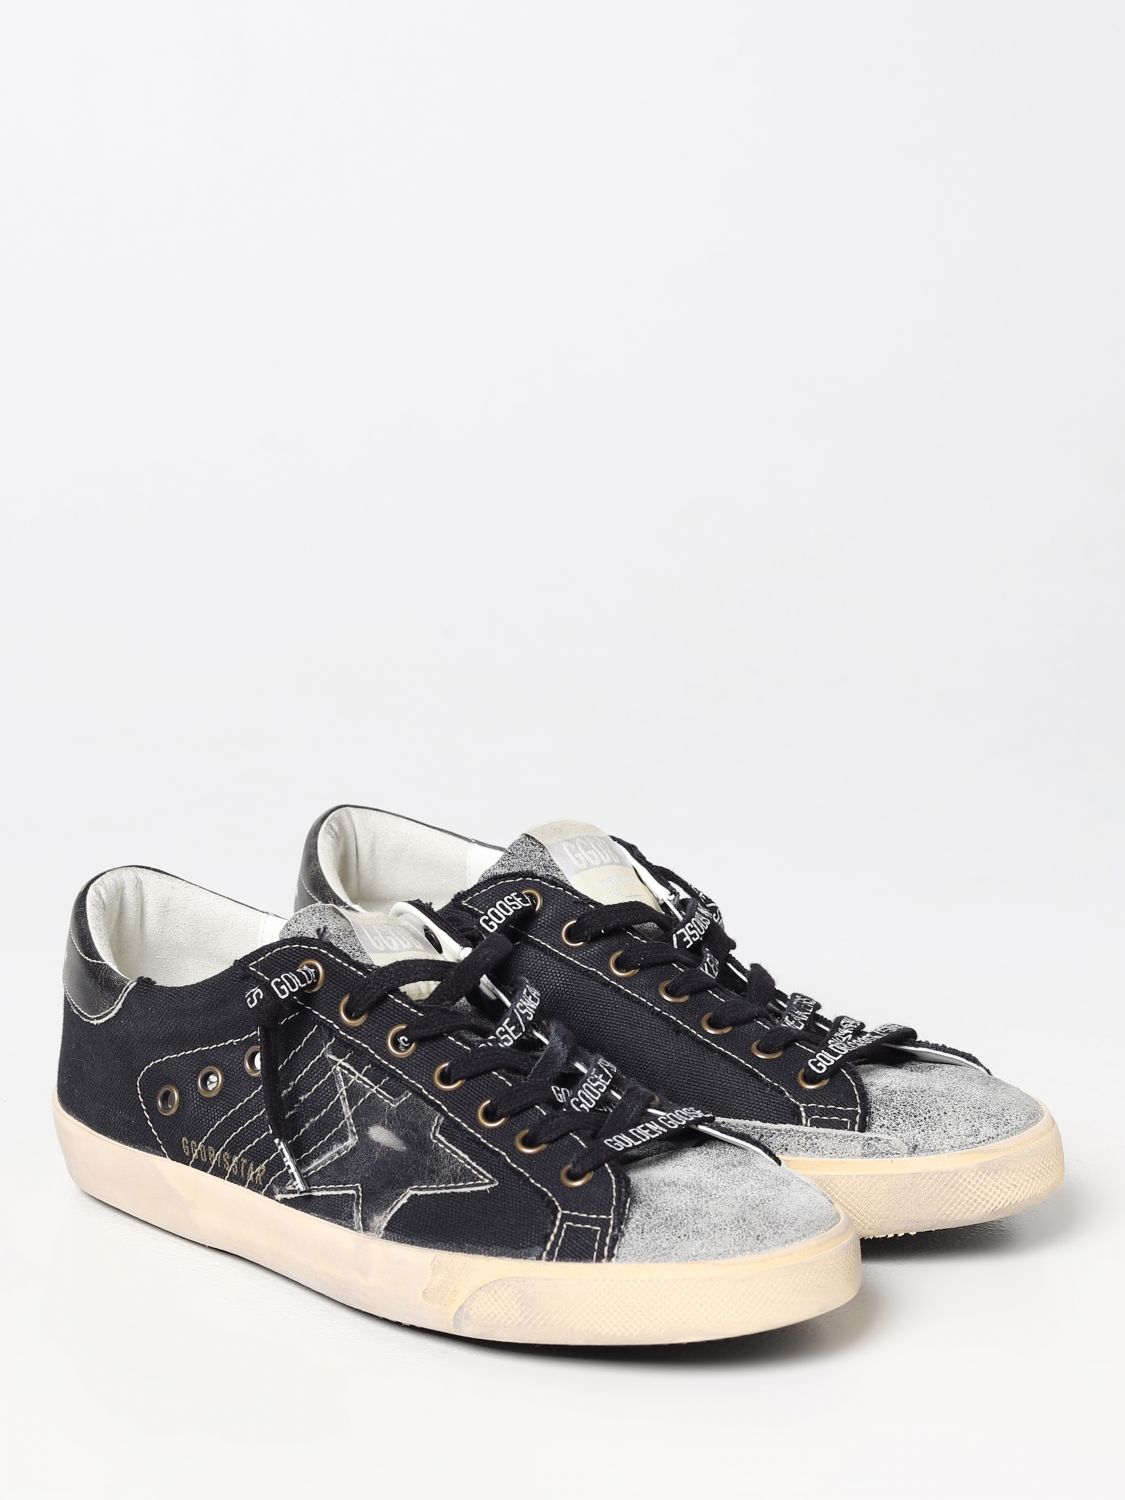 GOLDEN GOOSE: Super-Star Classic sneakers in canvas and leather - Black